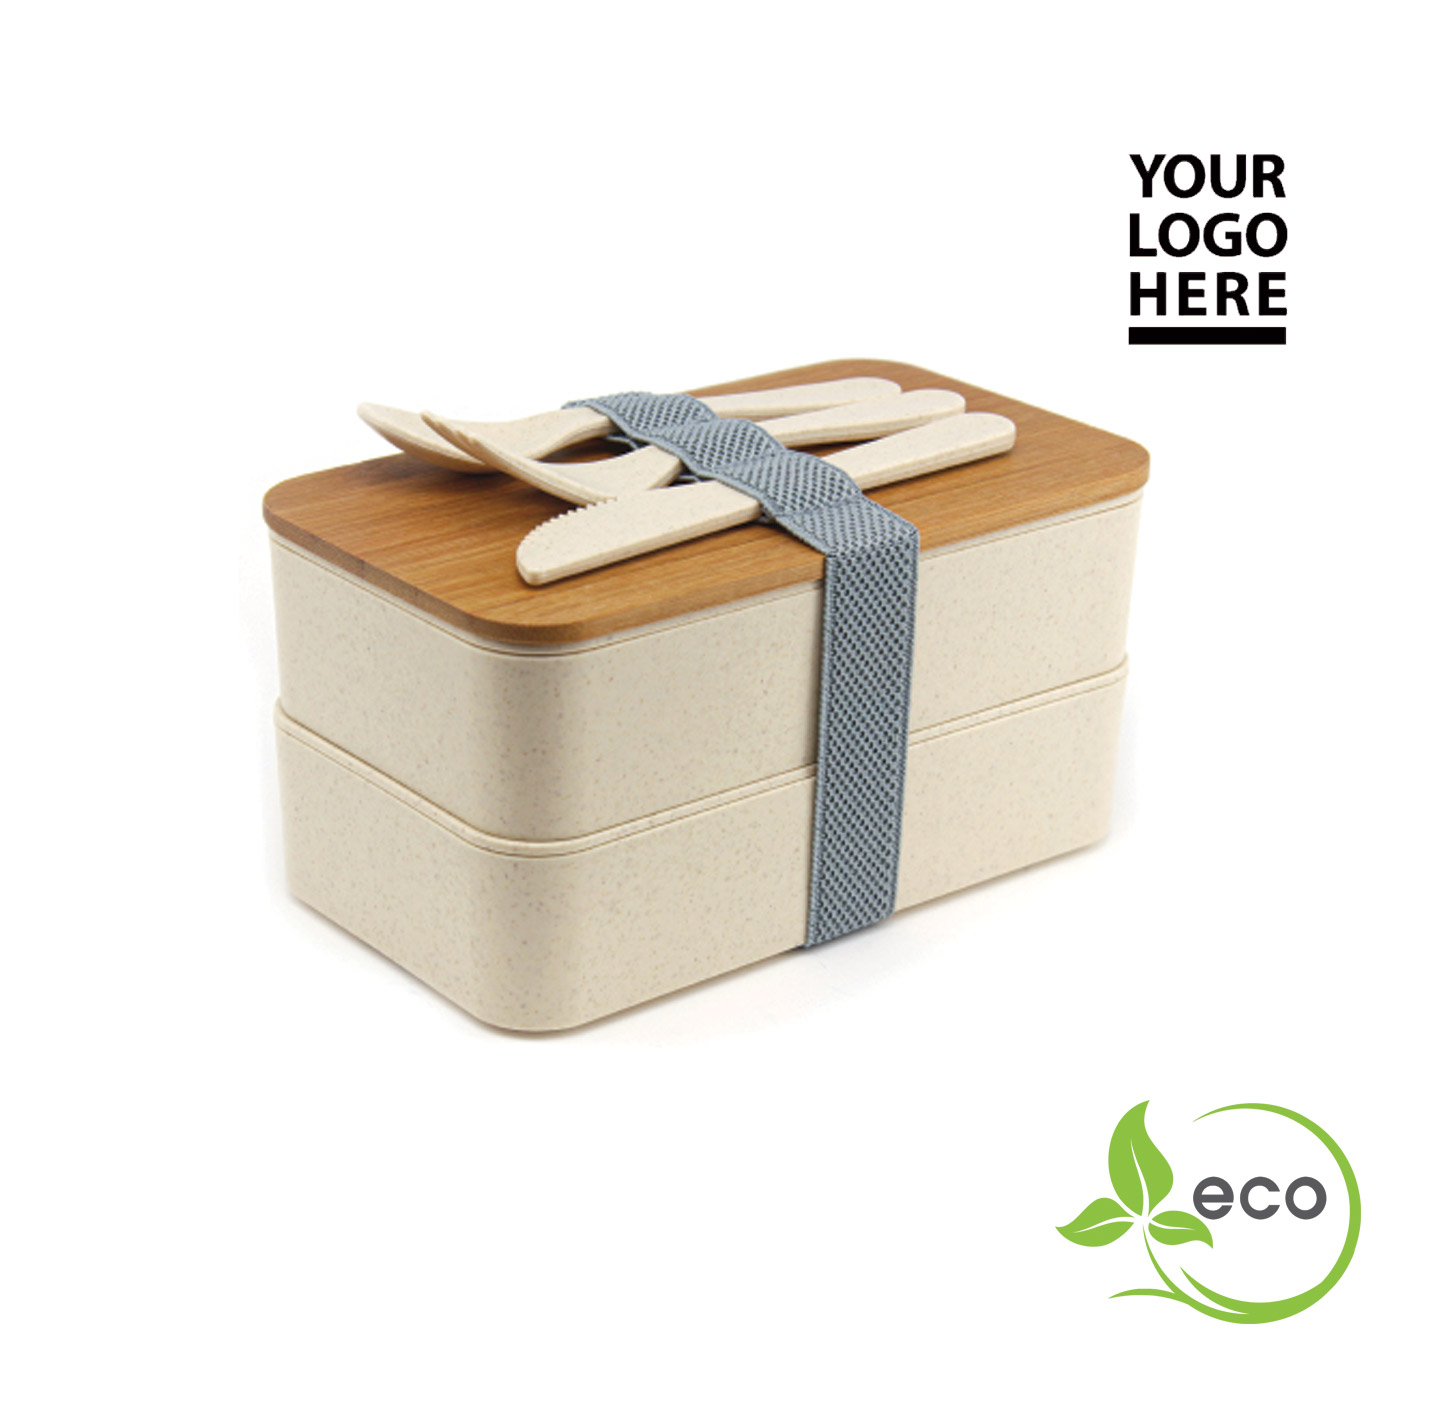 Eco friendly lunch box with bamboo lid and wheat straw spoon and fork